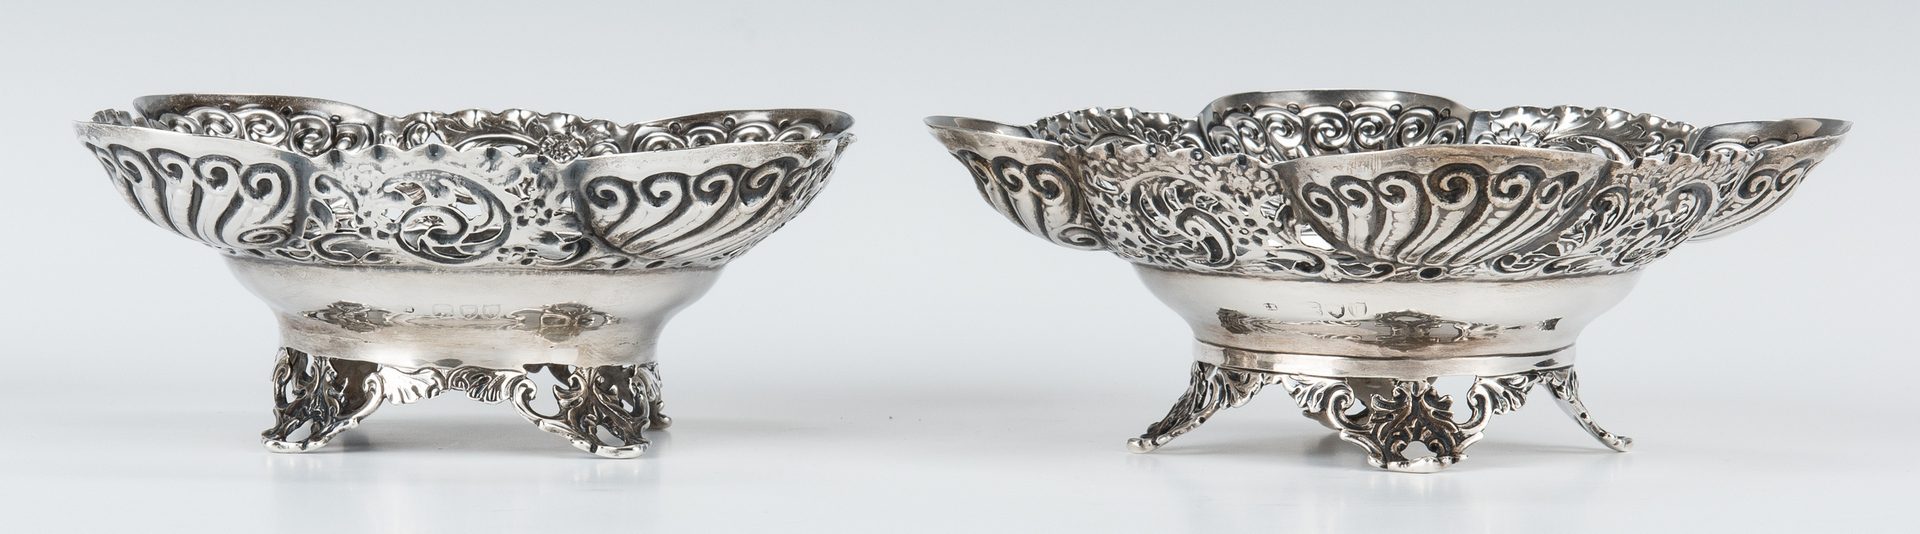 Lot 200: 3 Art Nouveau Period English Sterling Table Items